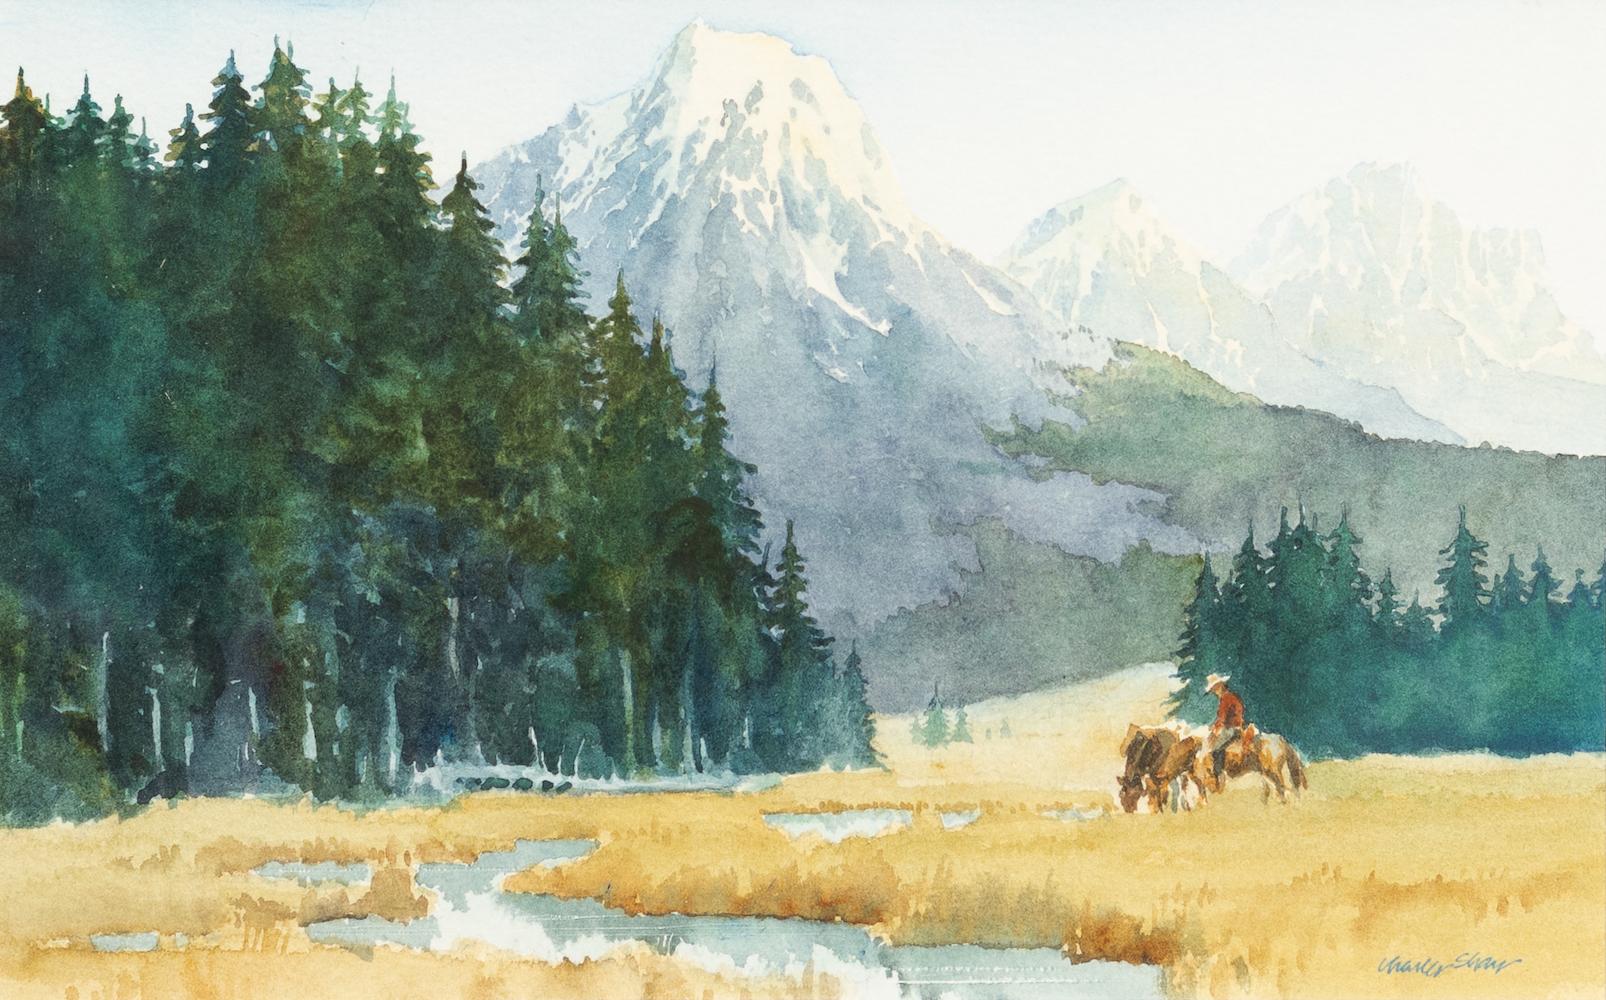 Charles Shaw Landscape Painting - "Mountain Landscape with Cowboy" Stream Forest Horses Grass Snow Capped Peaks